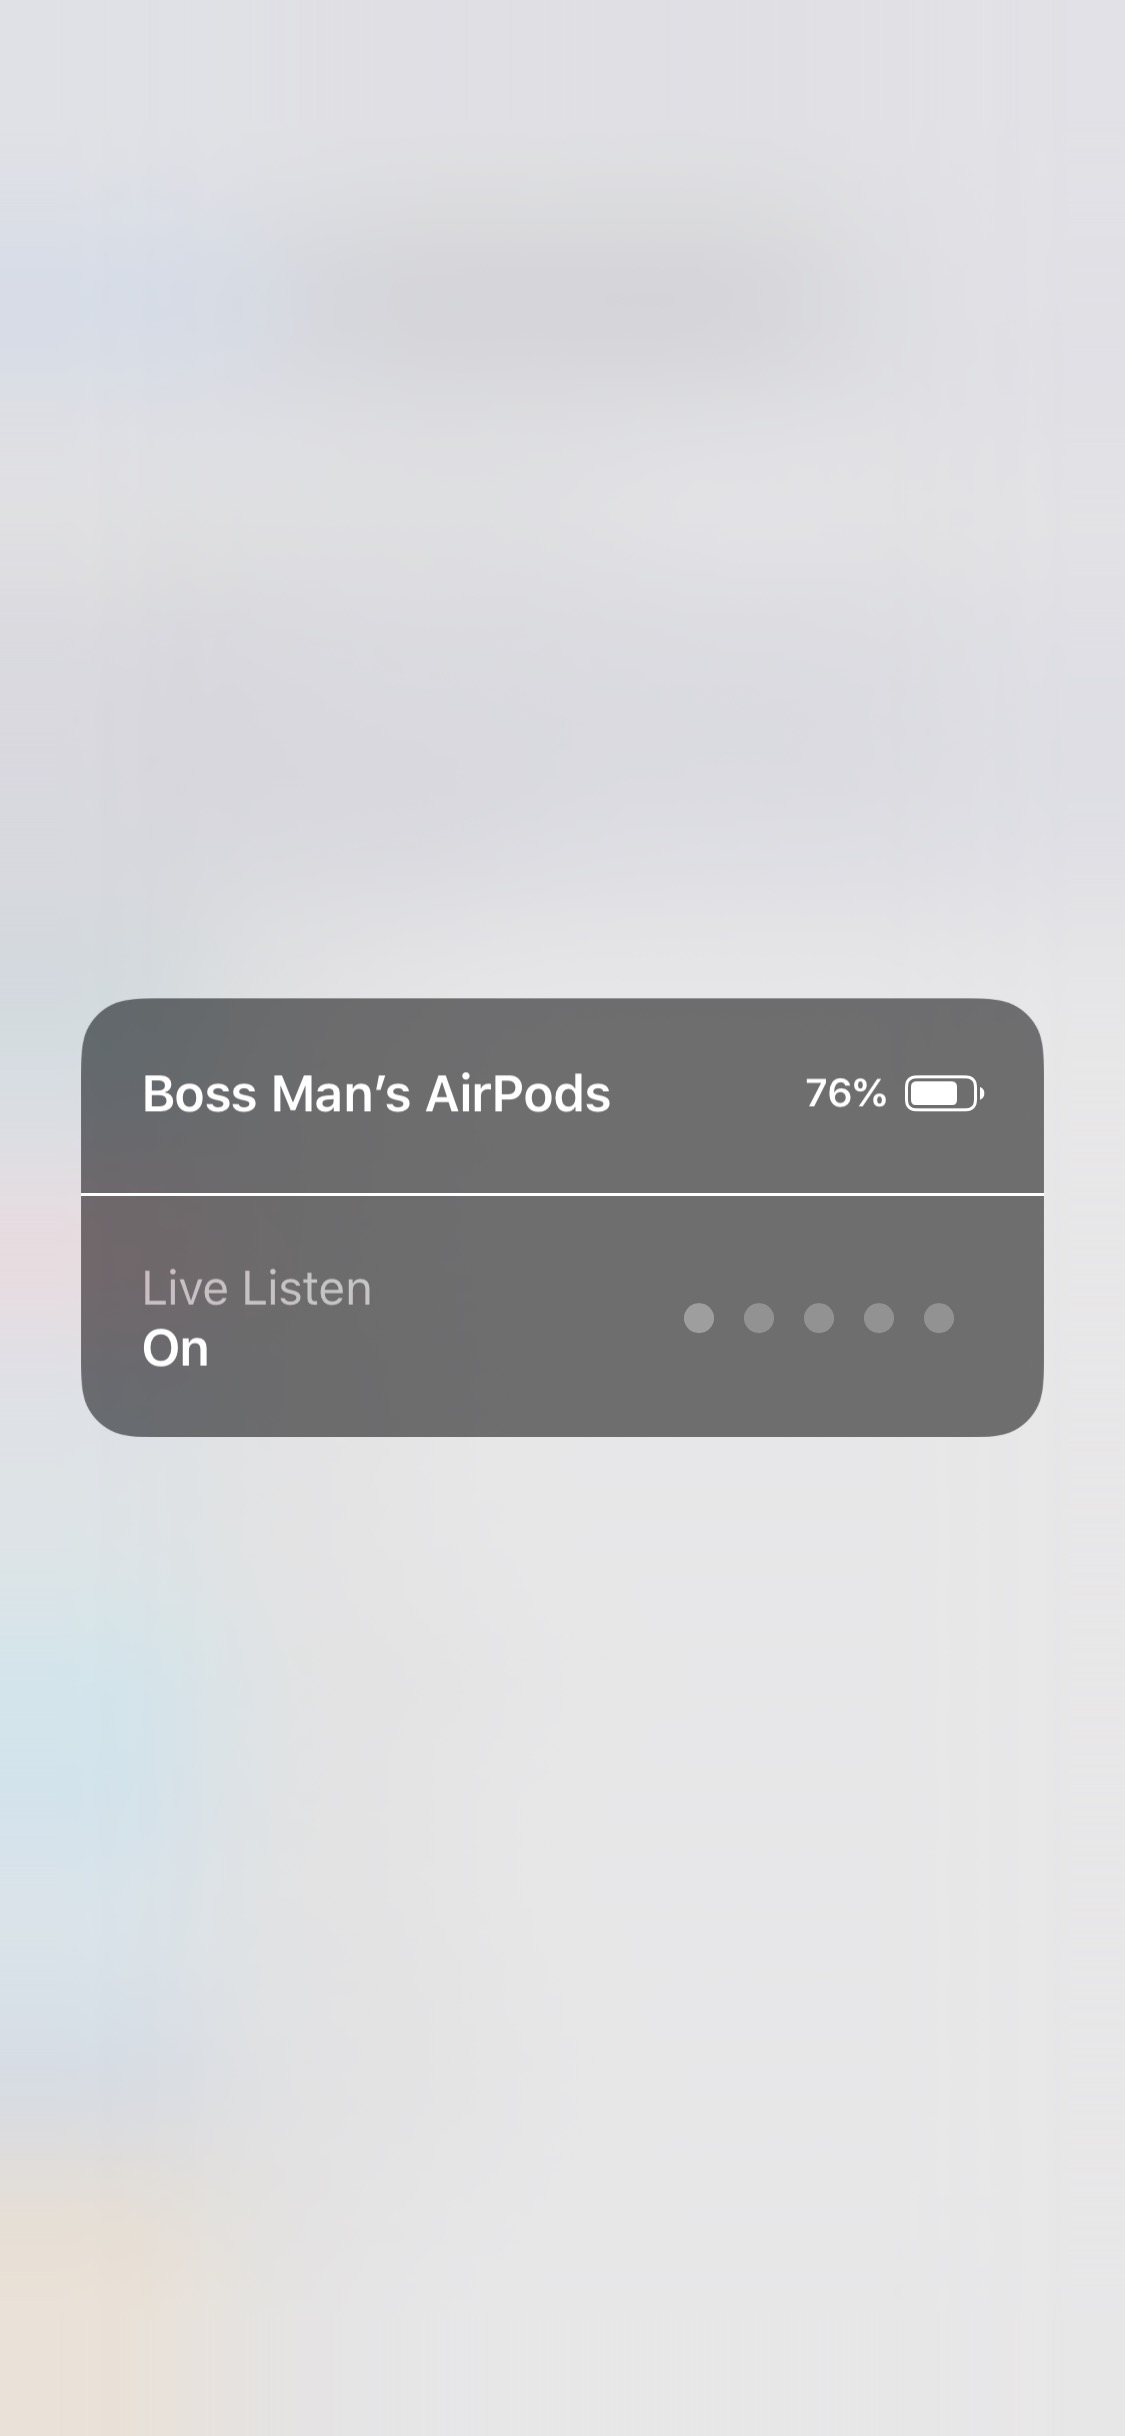 iOS 12 Lets You &#039;Live Listen&#039; to Your iPhone&#039;s Microphone Using AirPods